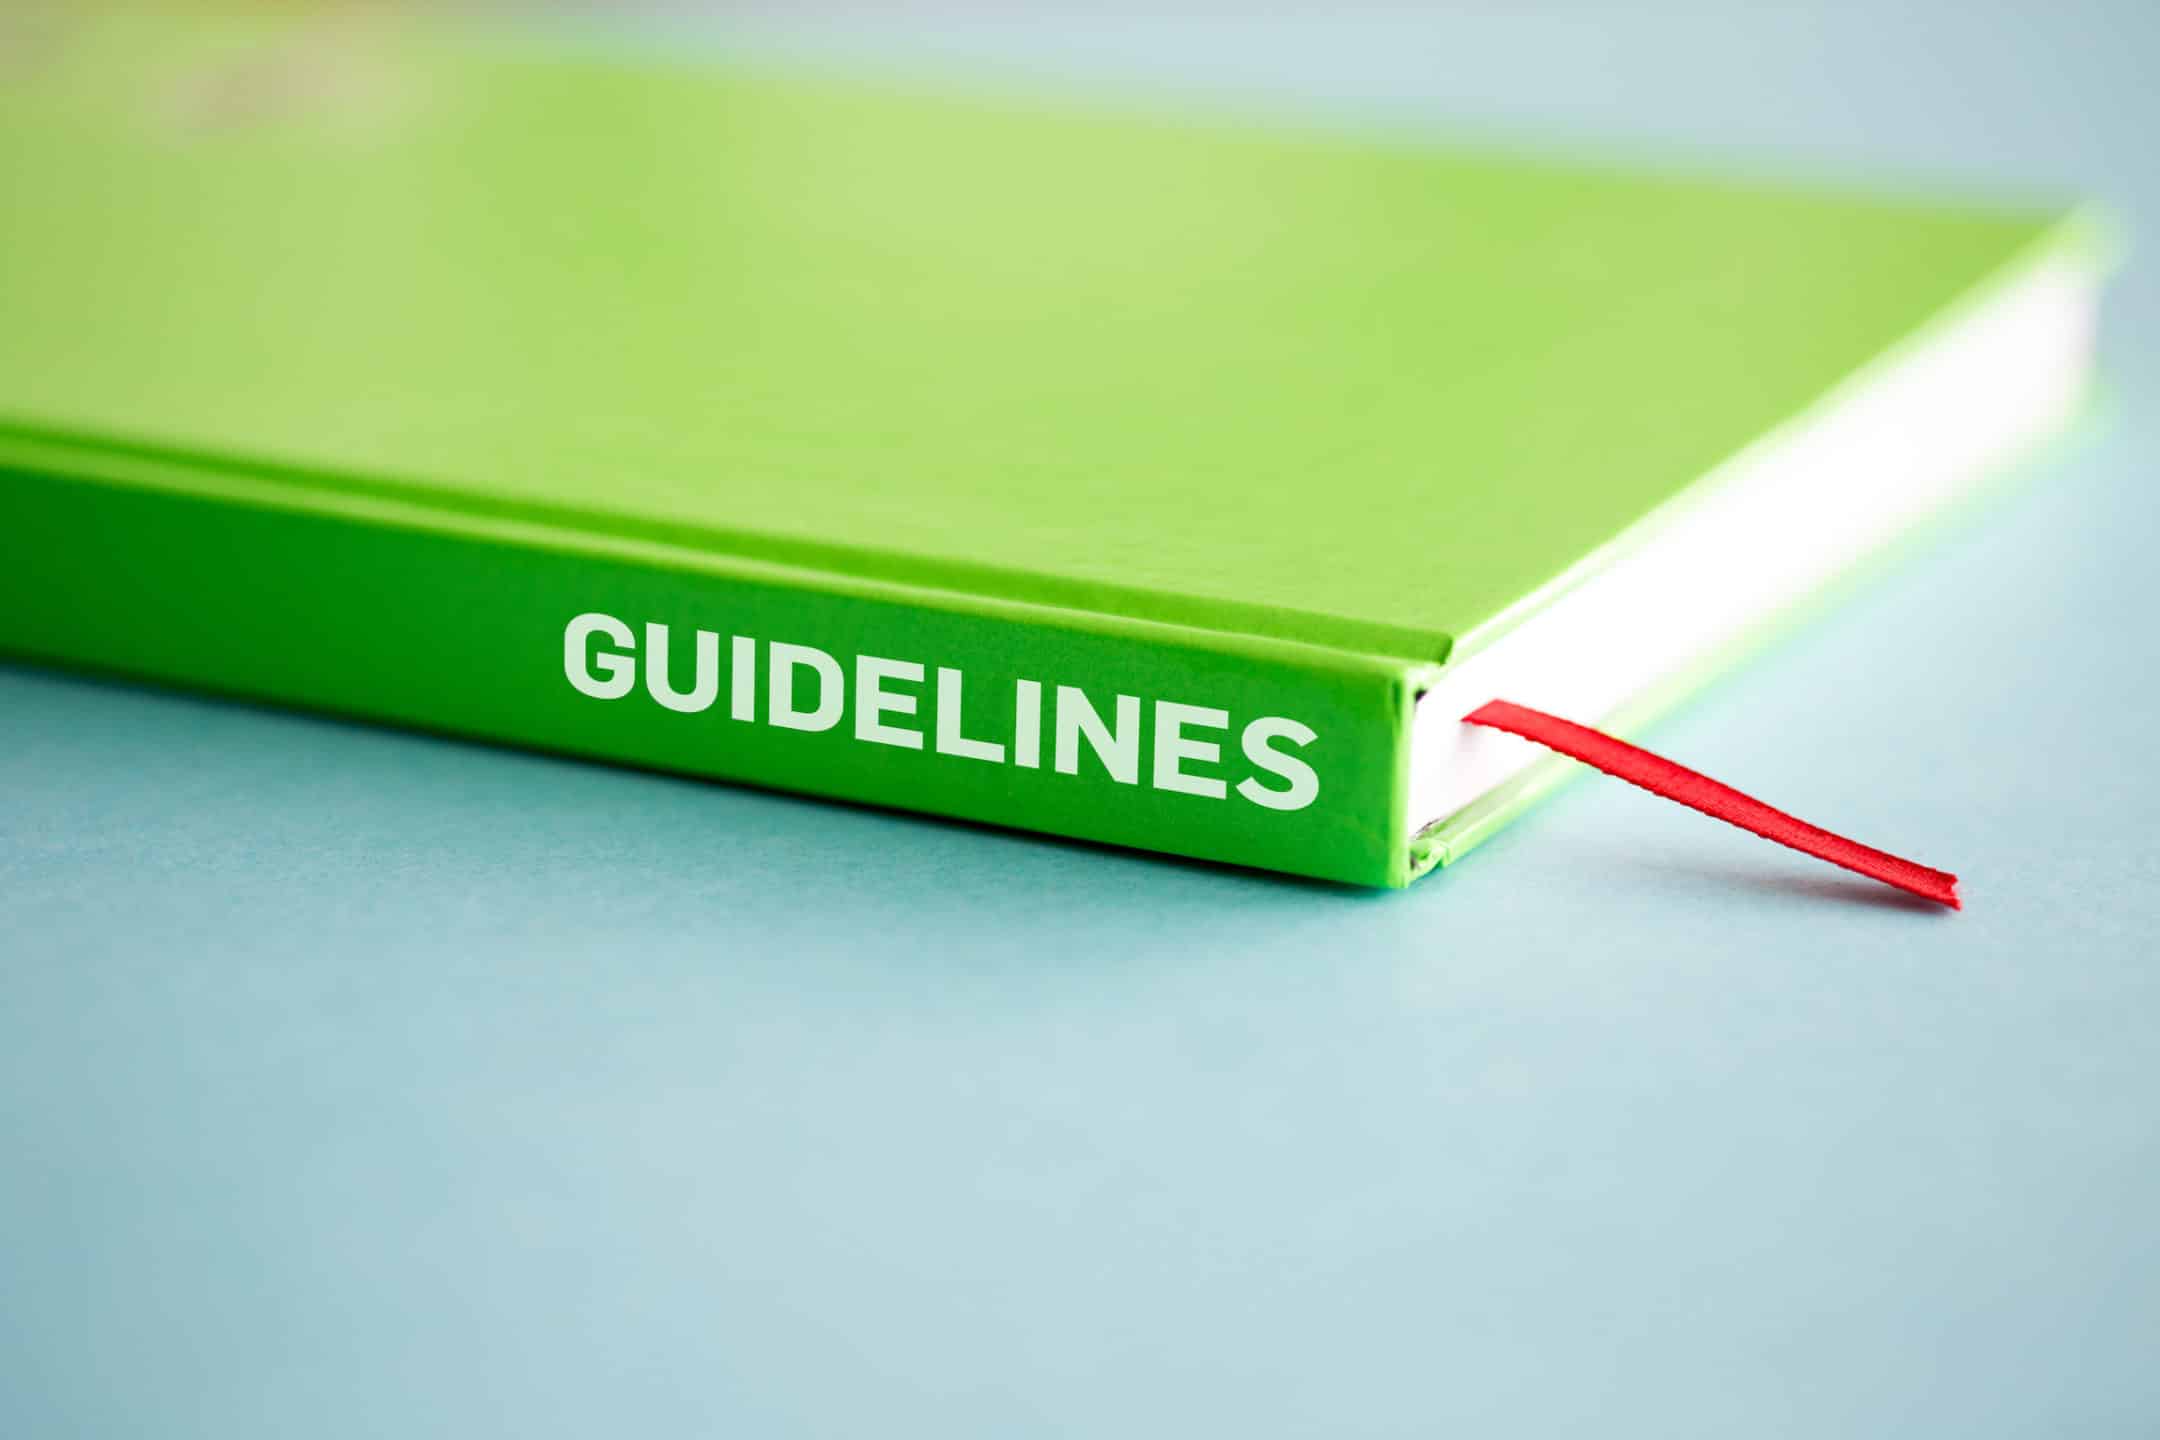 Green book with title 'Guidelines'